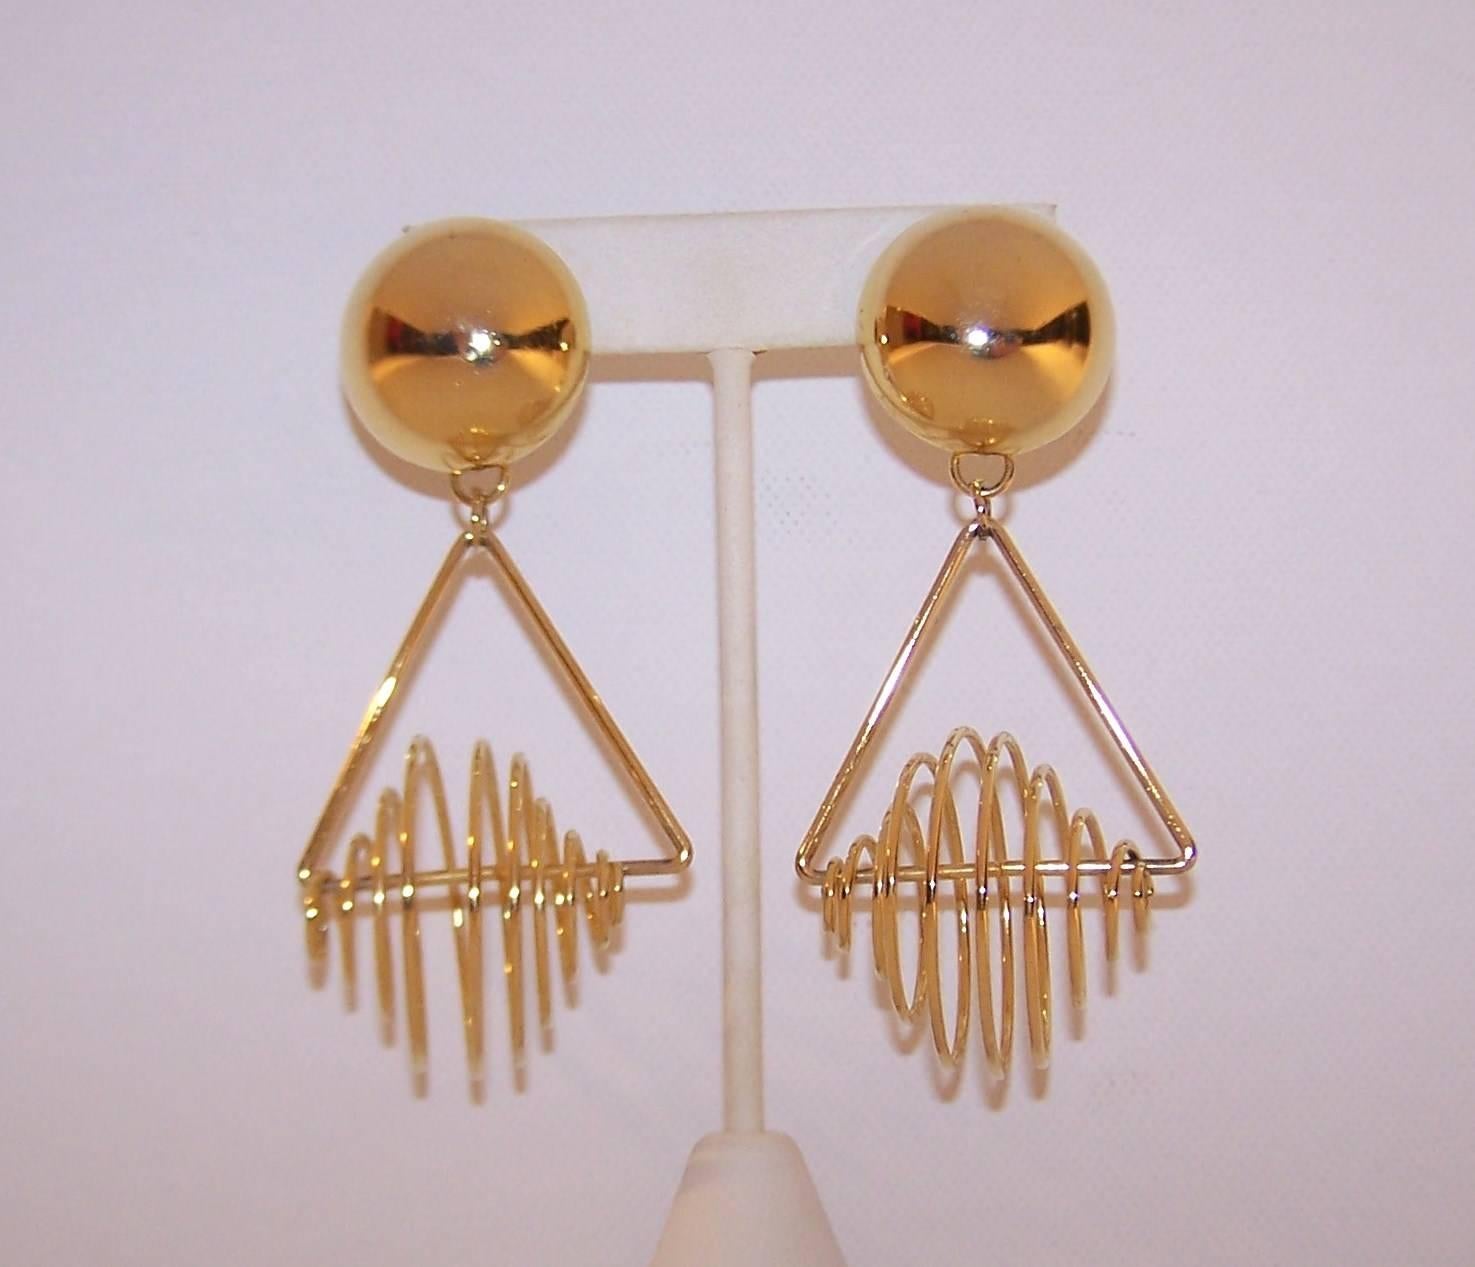 It's an op art mobile for your ears!  These fun gold tone earrings consist of a circular domed disc with a dangling triangle outfitted with a loopy spiral.  They are light weight and comfortable for all day wear.  Unsigned but fabulous nonetheless. 